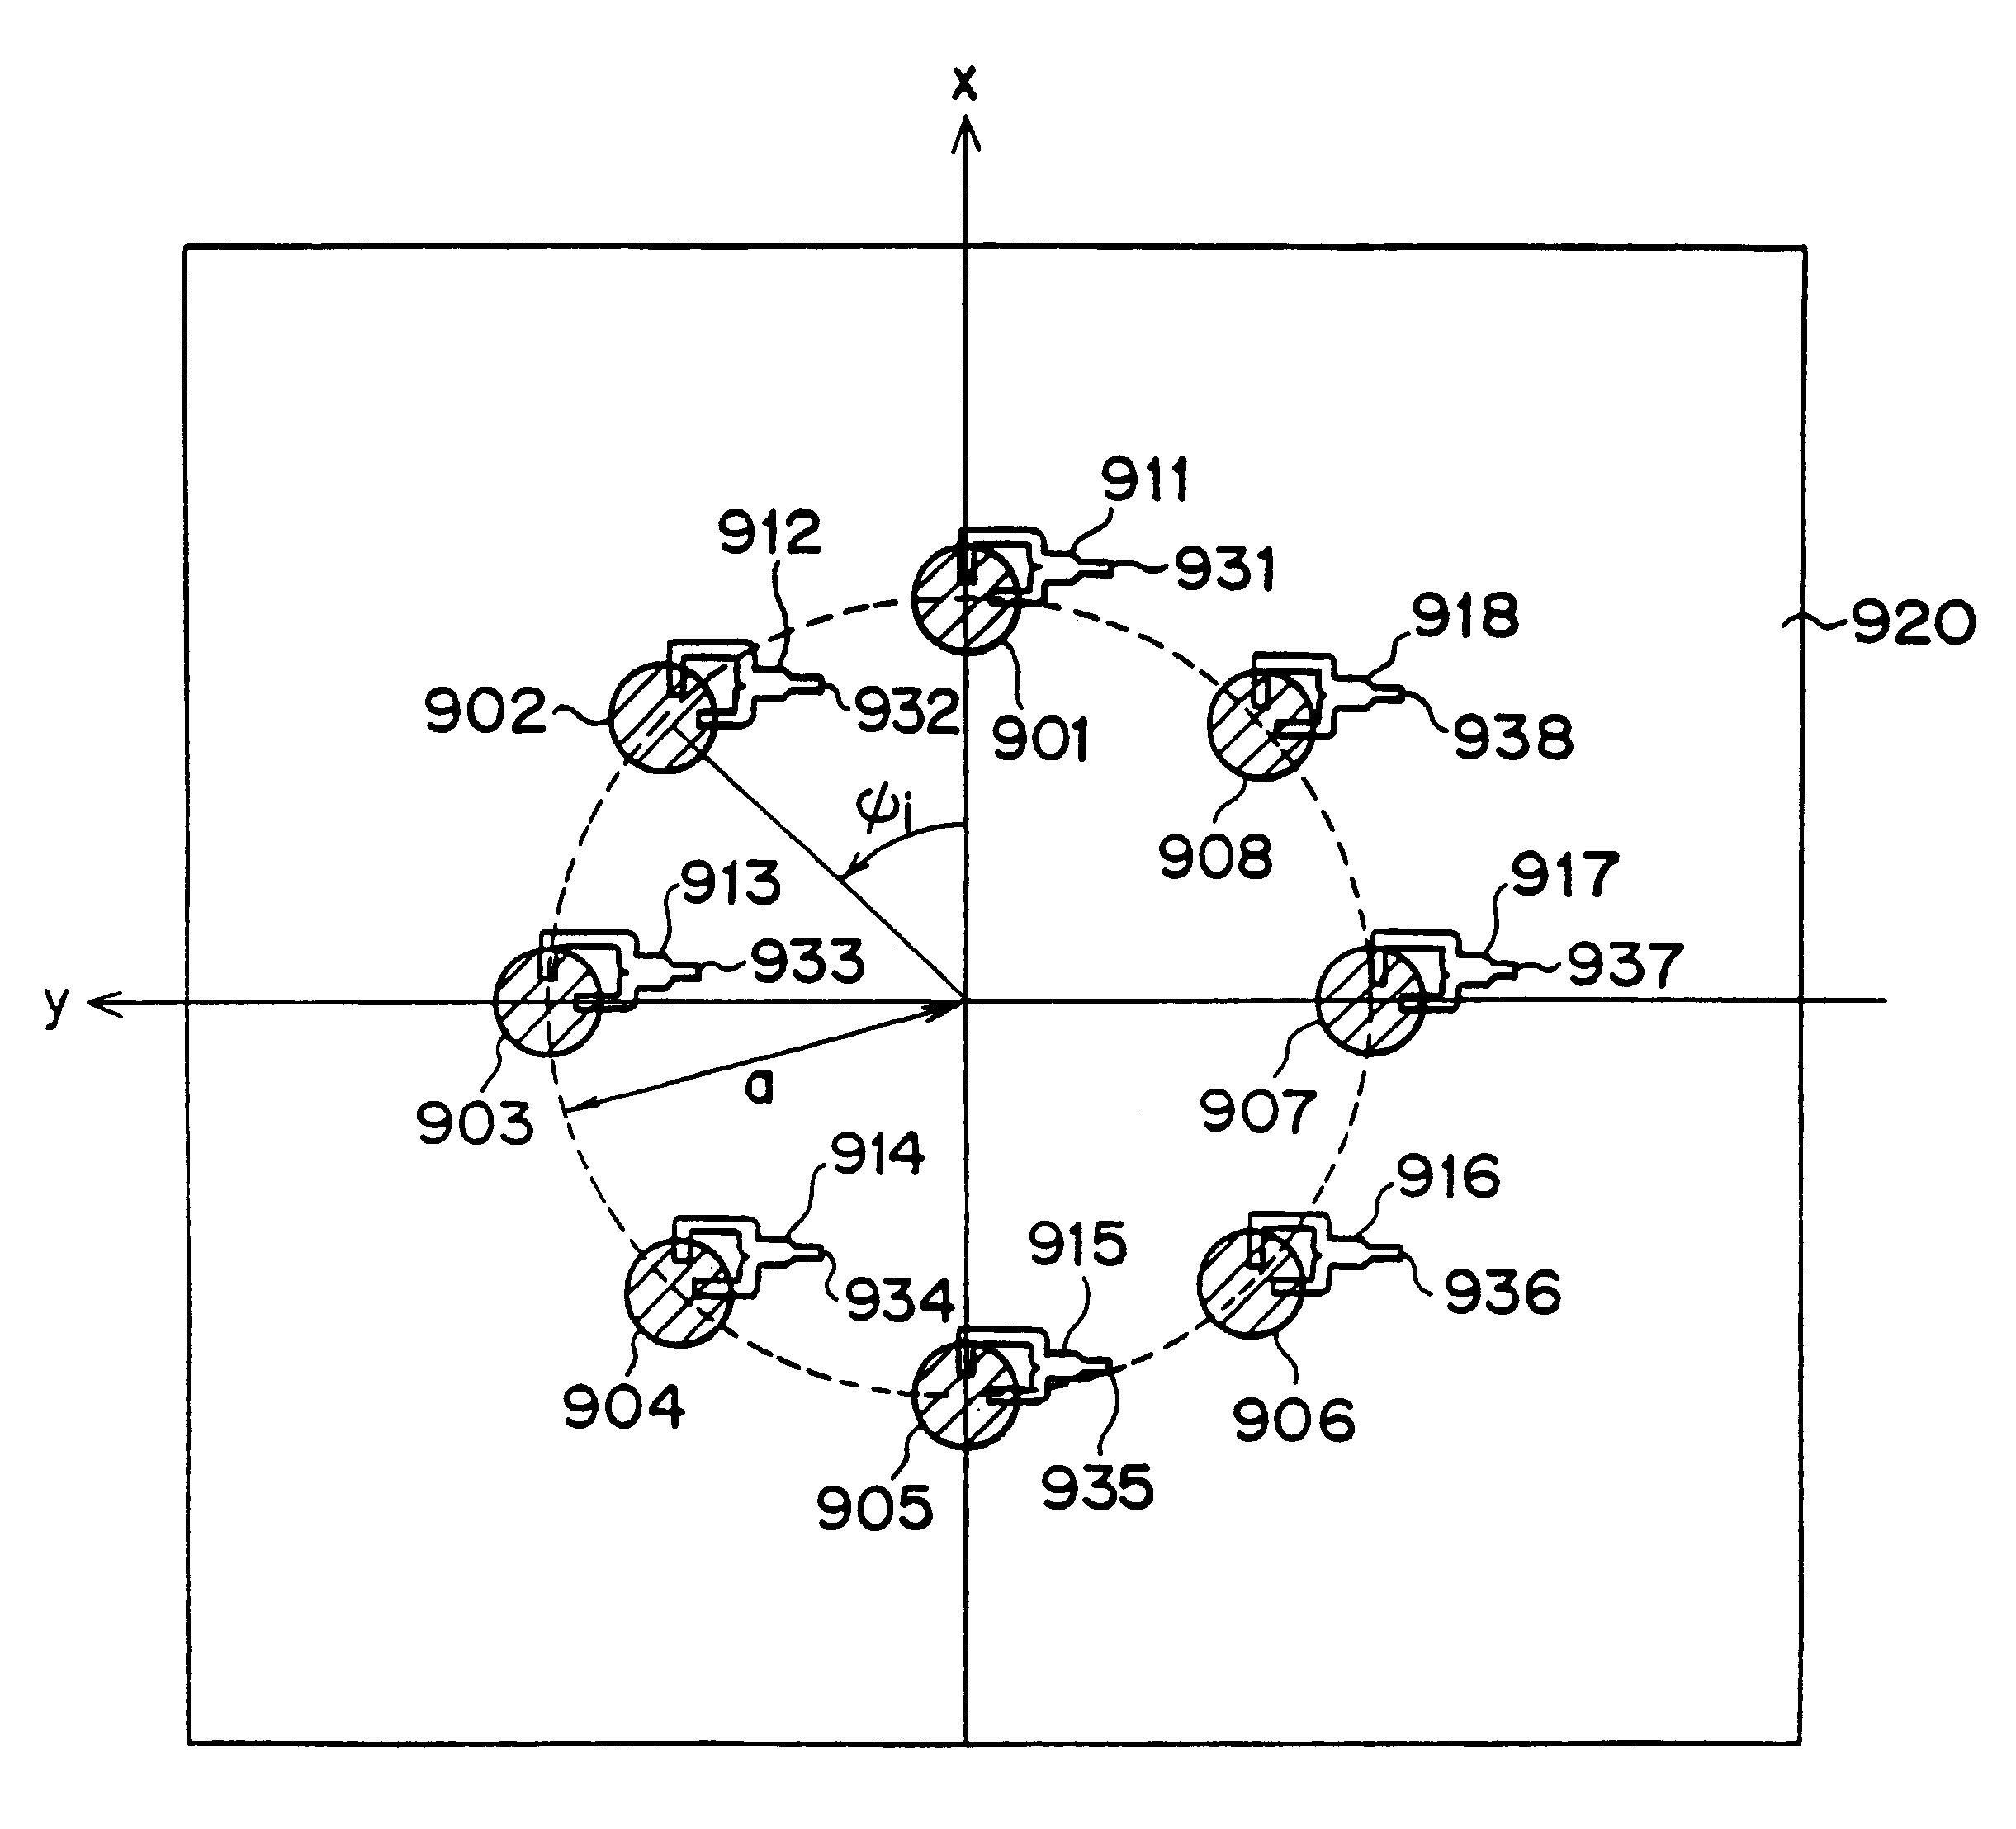 Beam scanning antennas with plurality of antenna elements for scanning beam direction